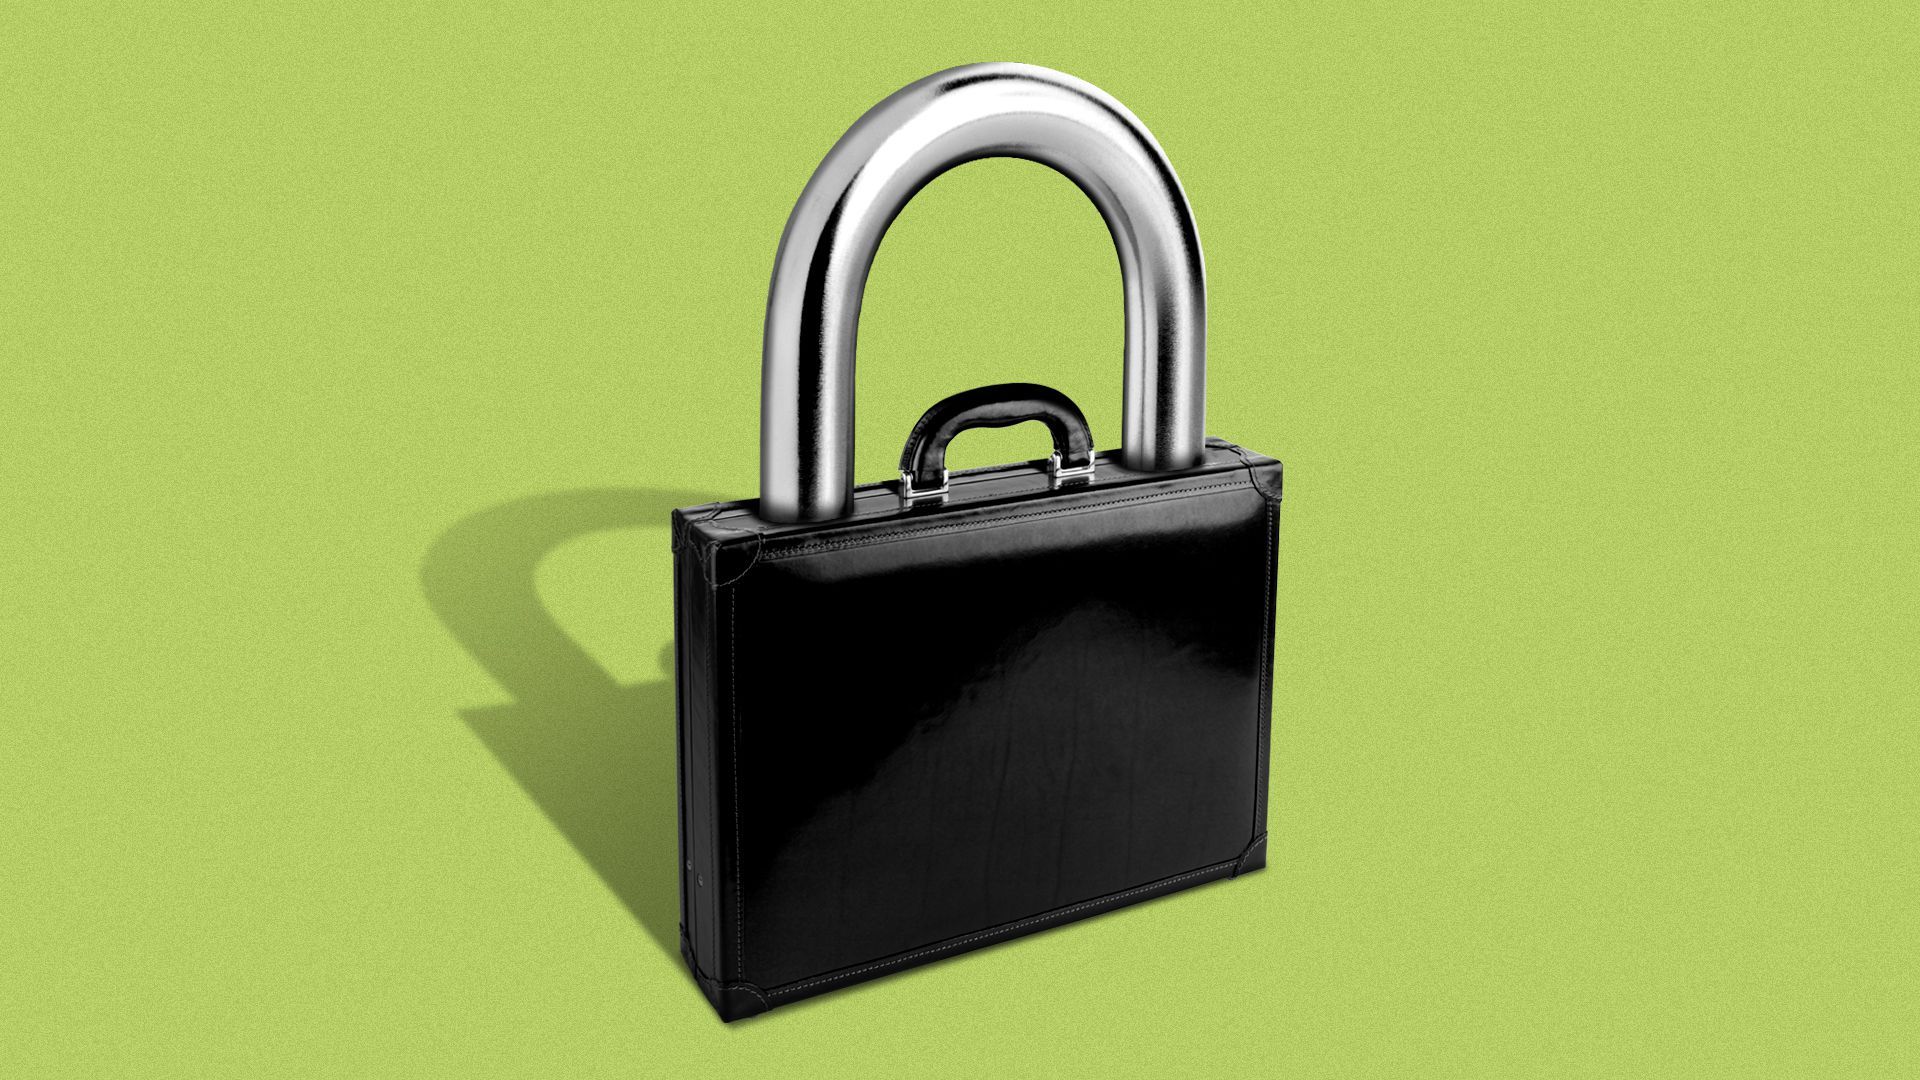 Illustration of a briefcase with a padlock on it